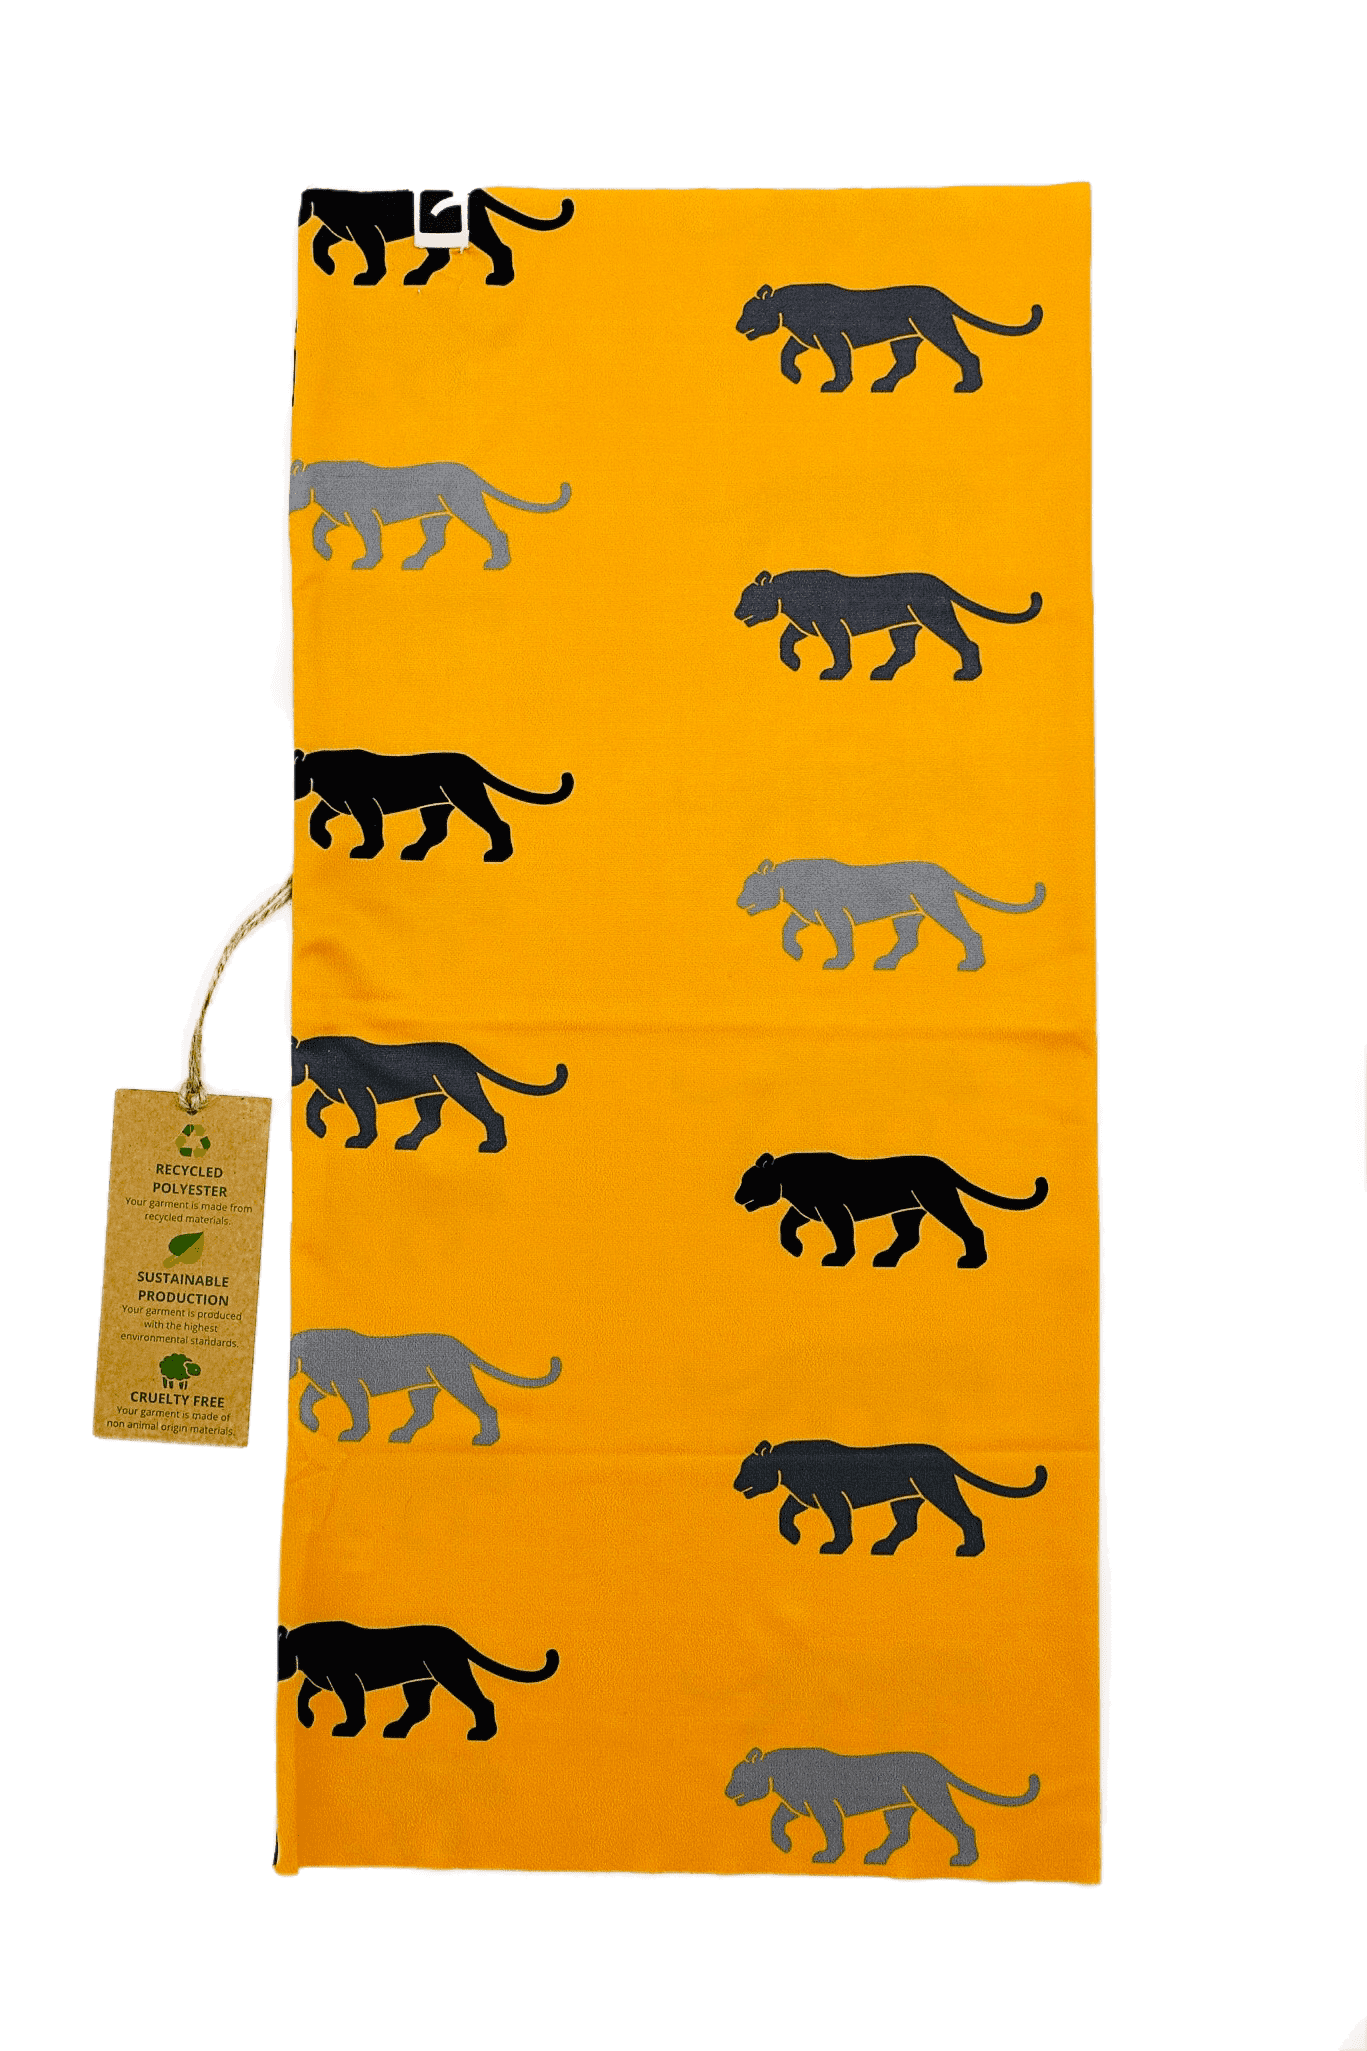 This is a unisex, multifunctional and sustainable bandana with animal print of a tiger in orange. It is made from recycled polyester which is breathable, durable, soft to touch, easy to care and fast drying material. It makes it perfectly suitable for all kinds of sports like biking, hiking, jogging or skiing. This is a versatile bandana that can be used as a scarf, face mask, bandana or headband and it is also known as tube scarf, neck gaiter or face mask. It is a vegan product certified by PETA.